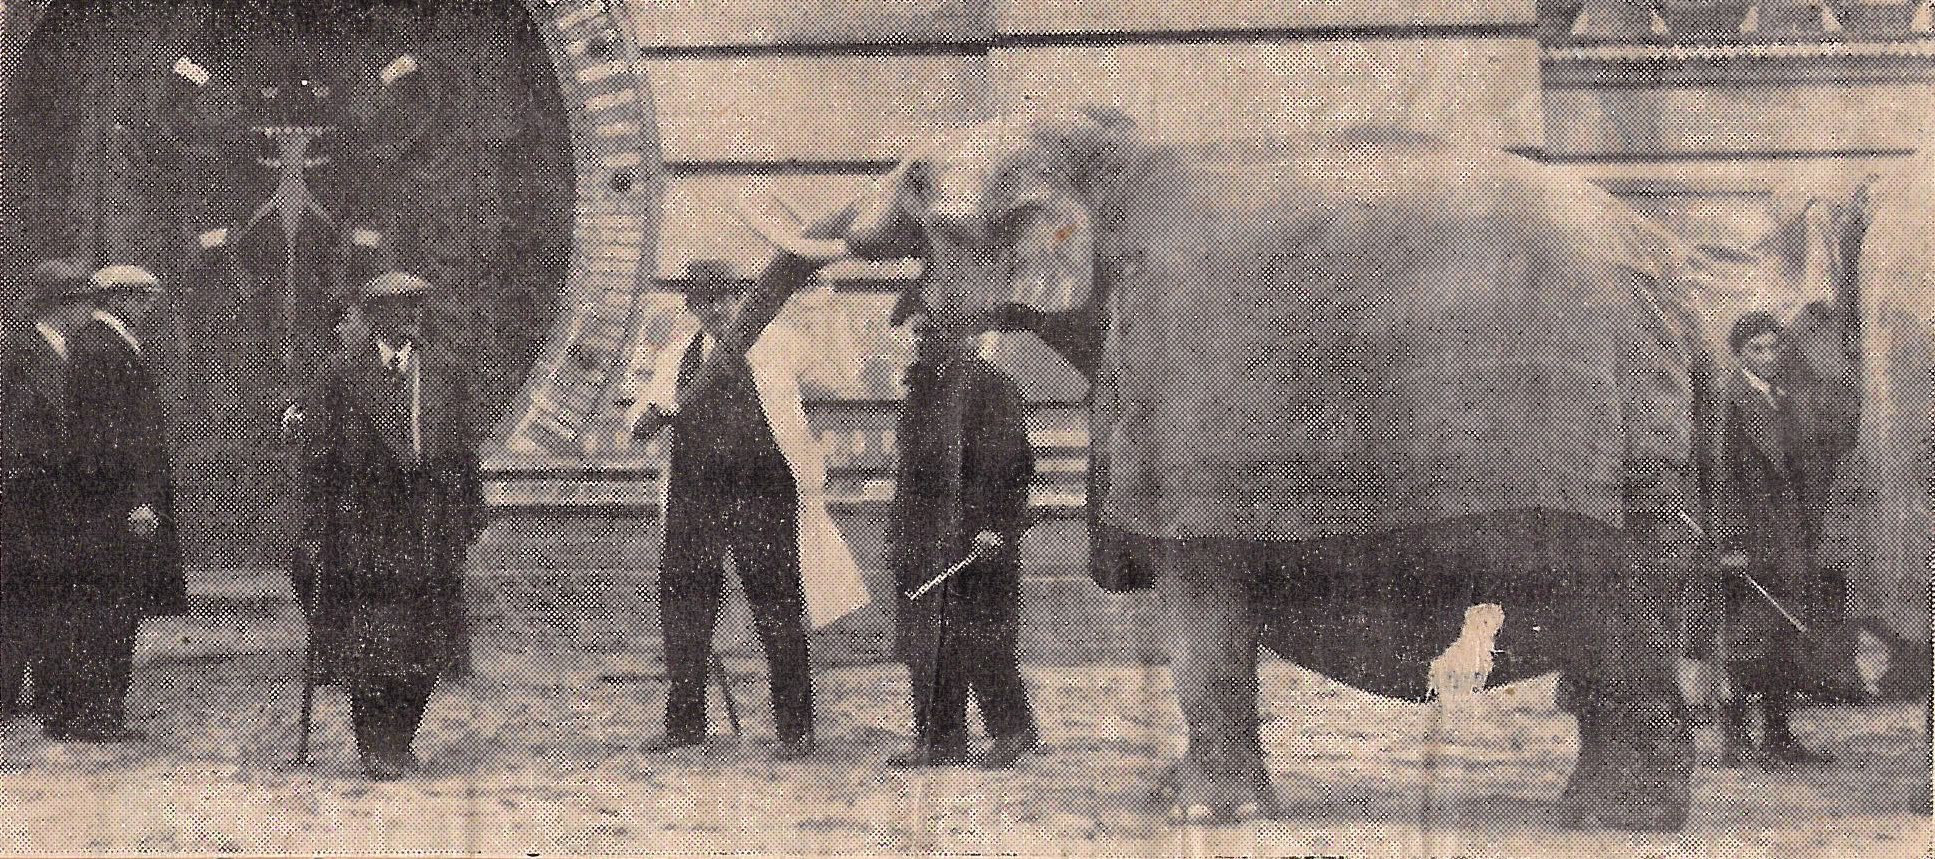 Newspaper clipping. Photograph: Man in white coat and hat holds the tip of the trunk of a standing elephant that has a blanket on its back. Six other people with hats and walking sticks or whips gather round.